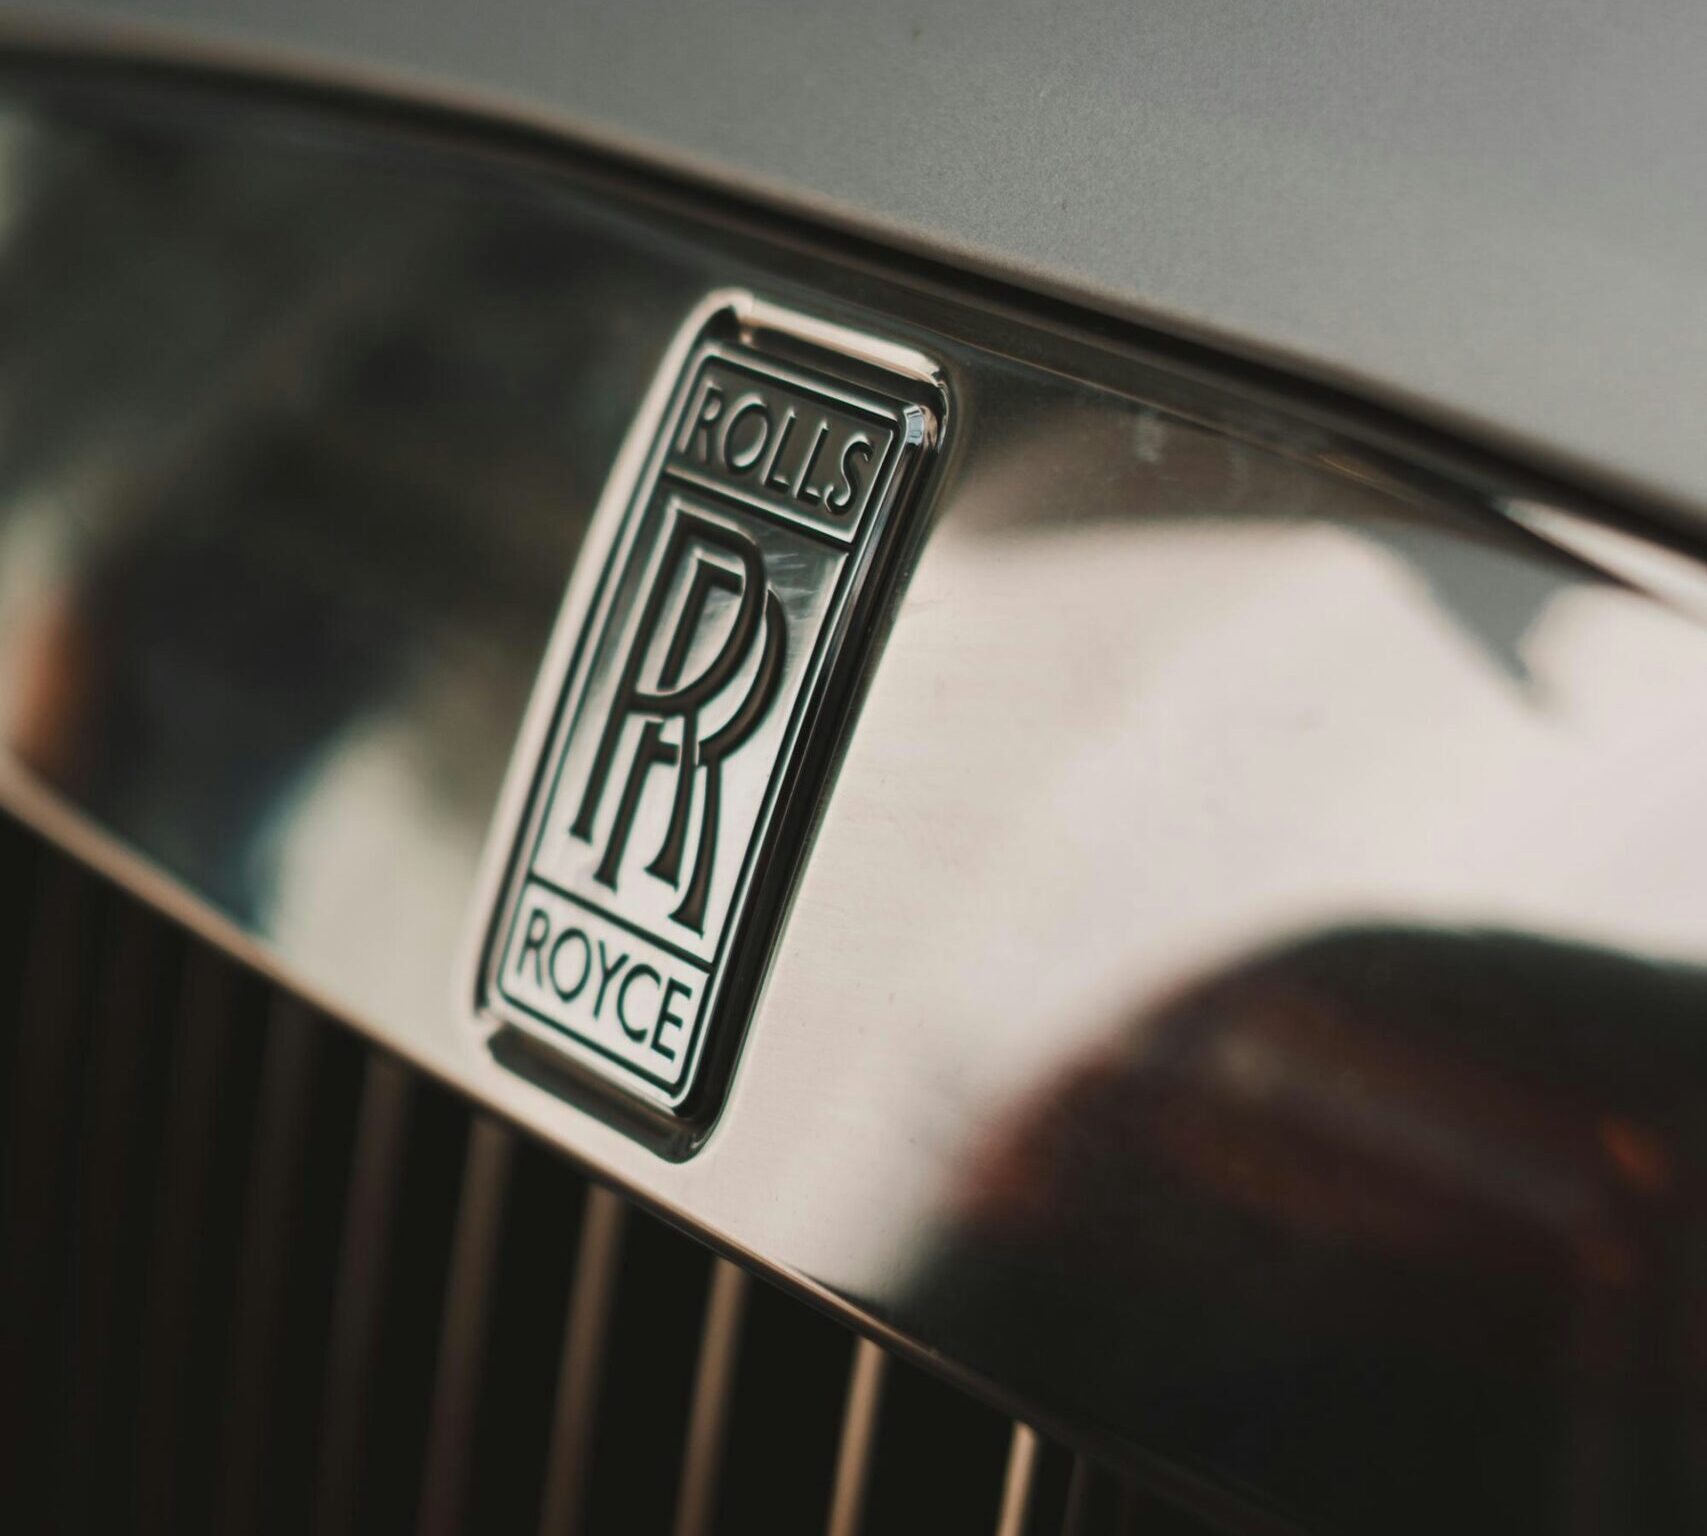 A close-up photo of a Rolls-Royce logo on the front grille of a car.